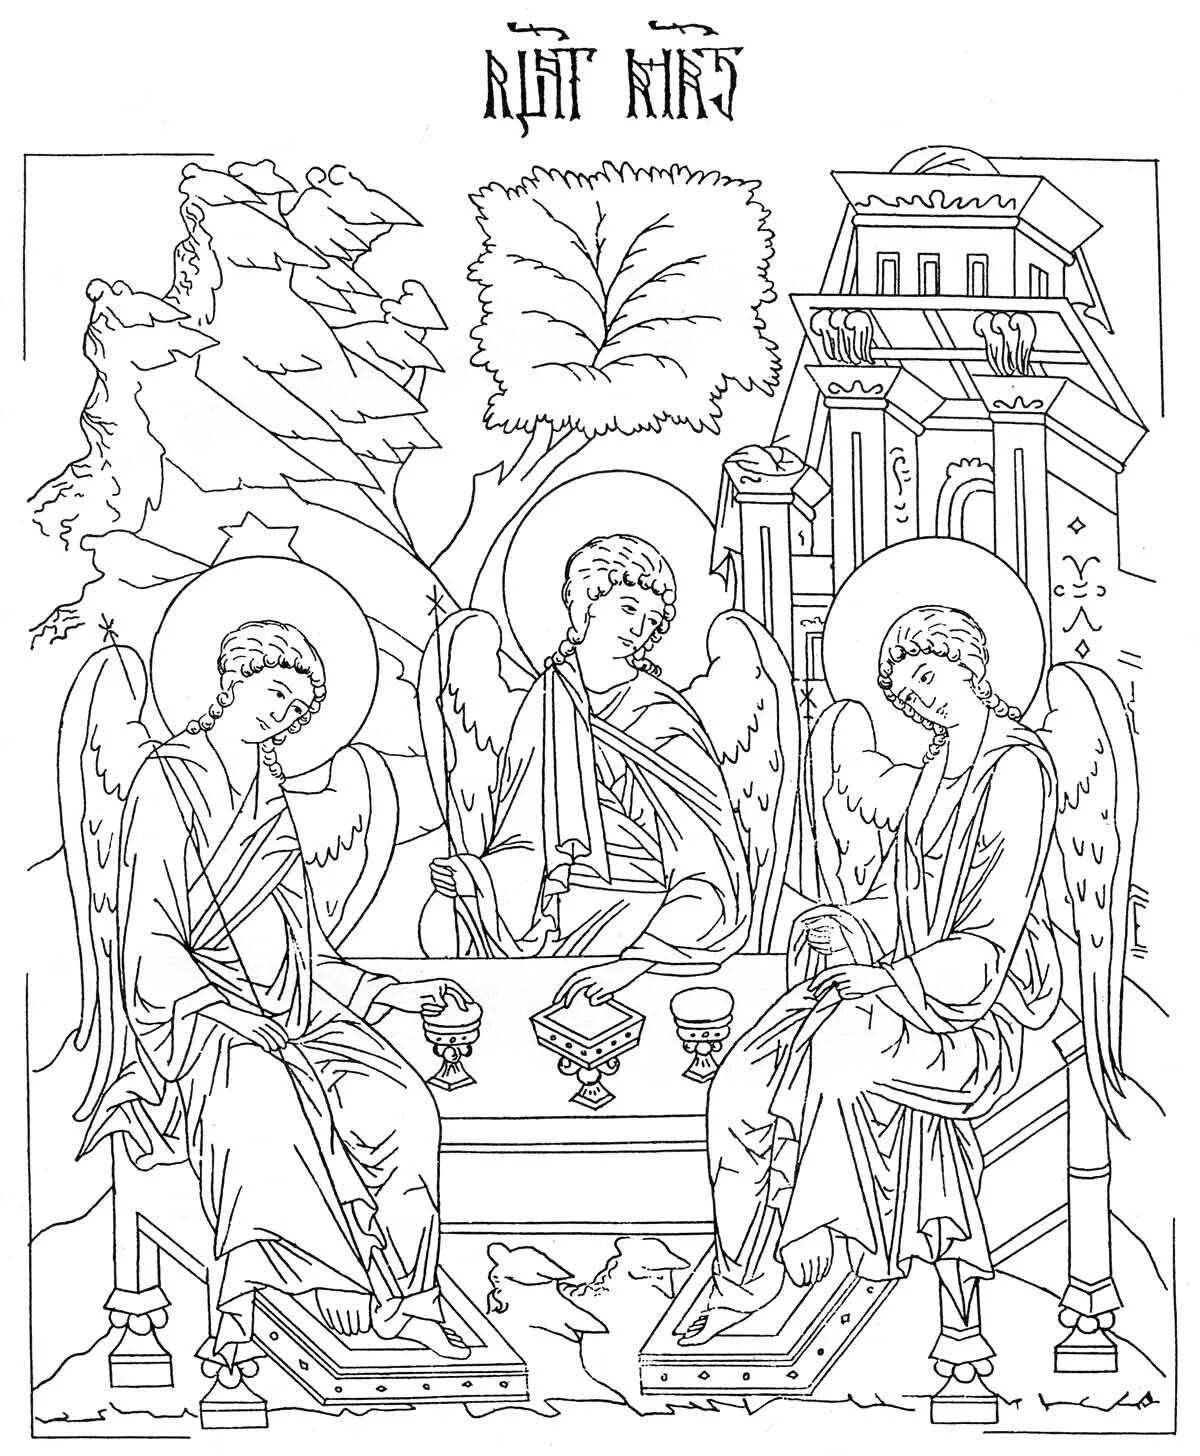 Coloring page festive orthodox holiday